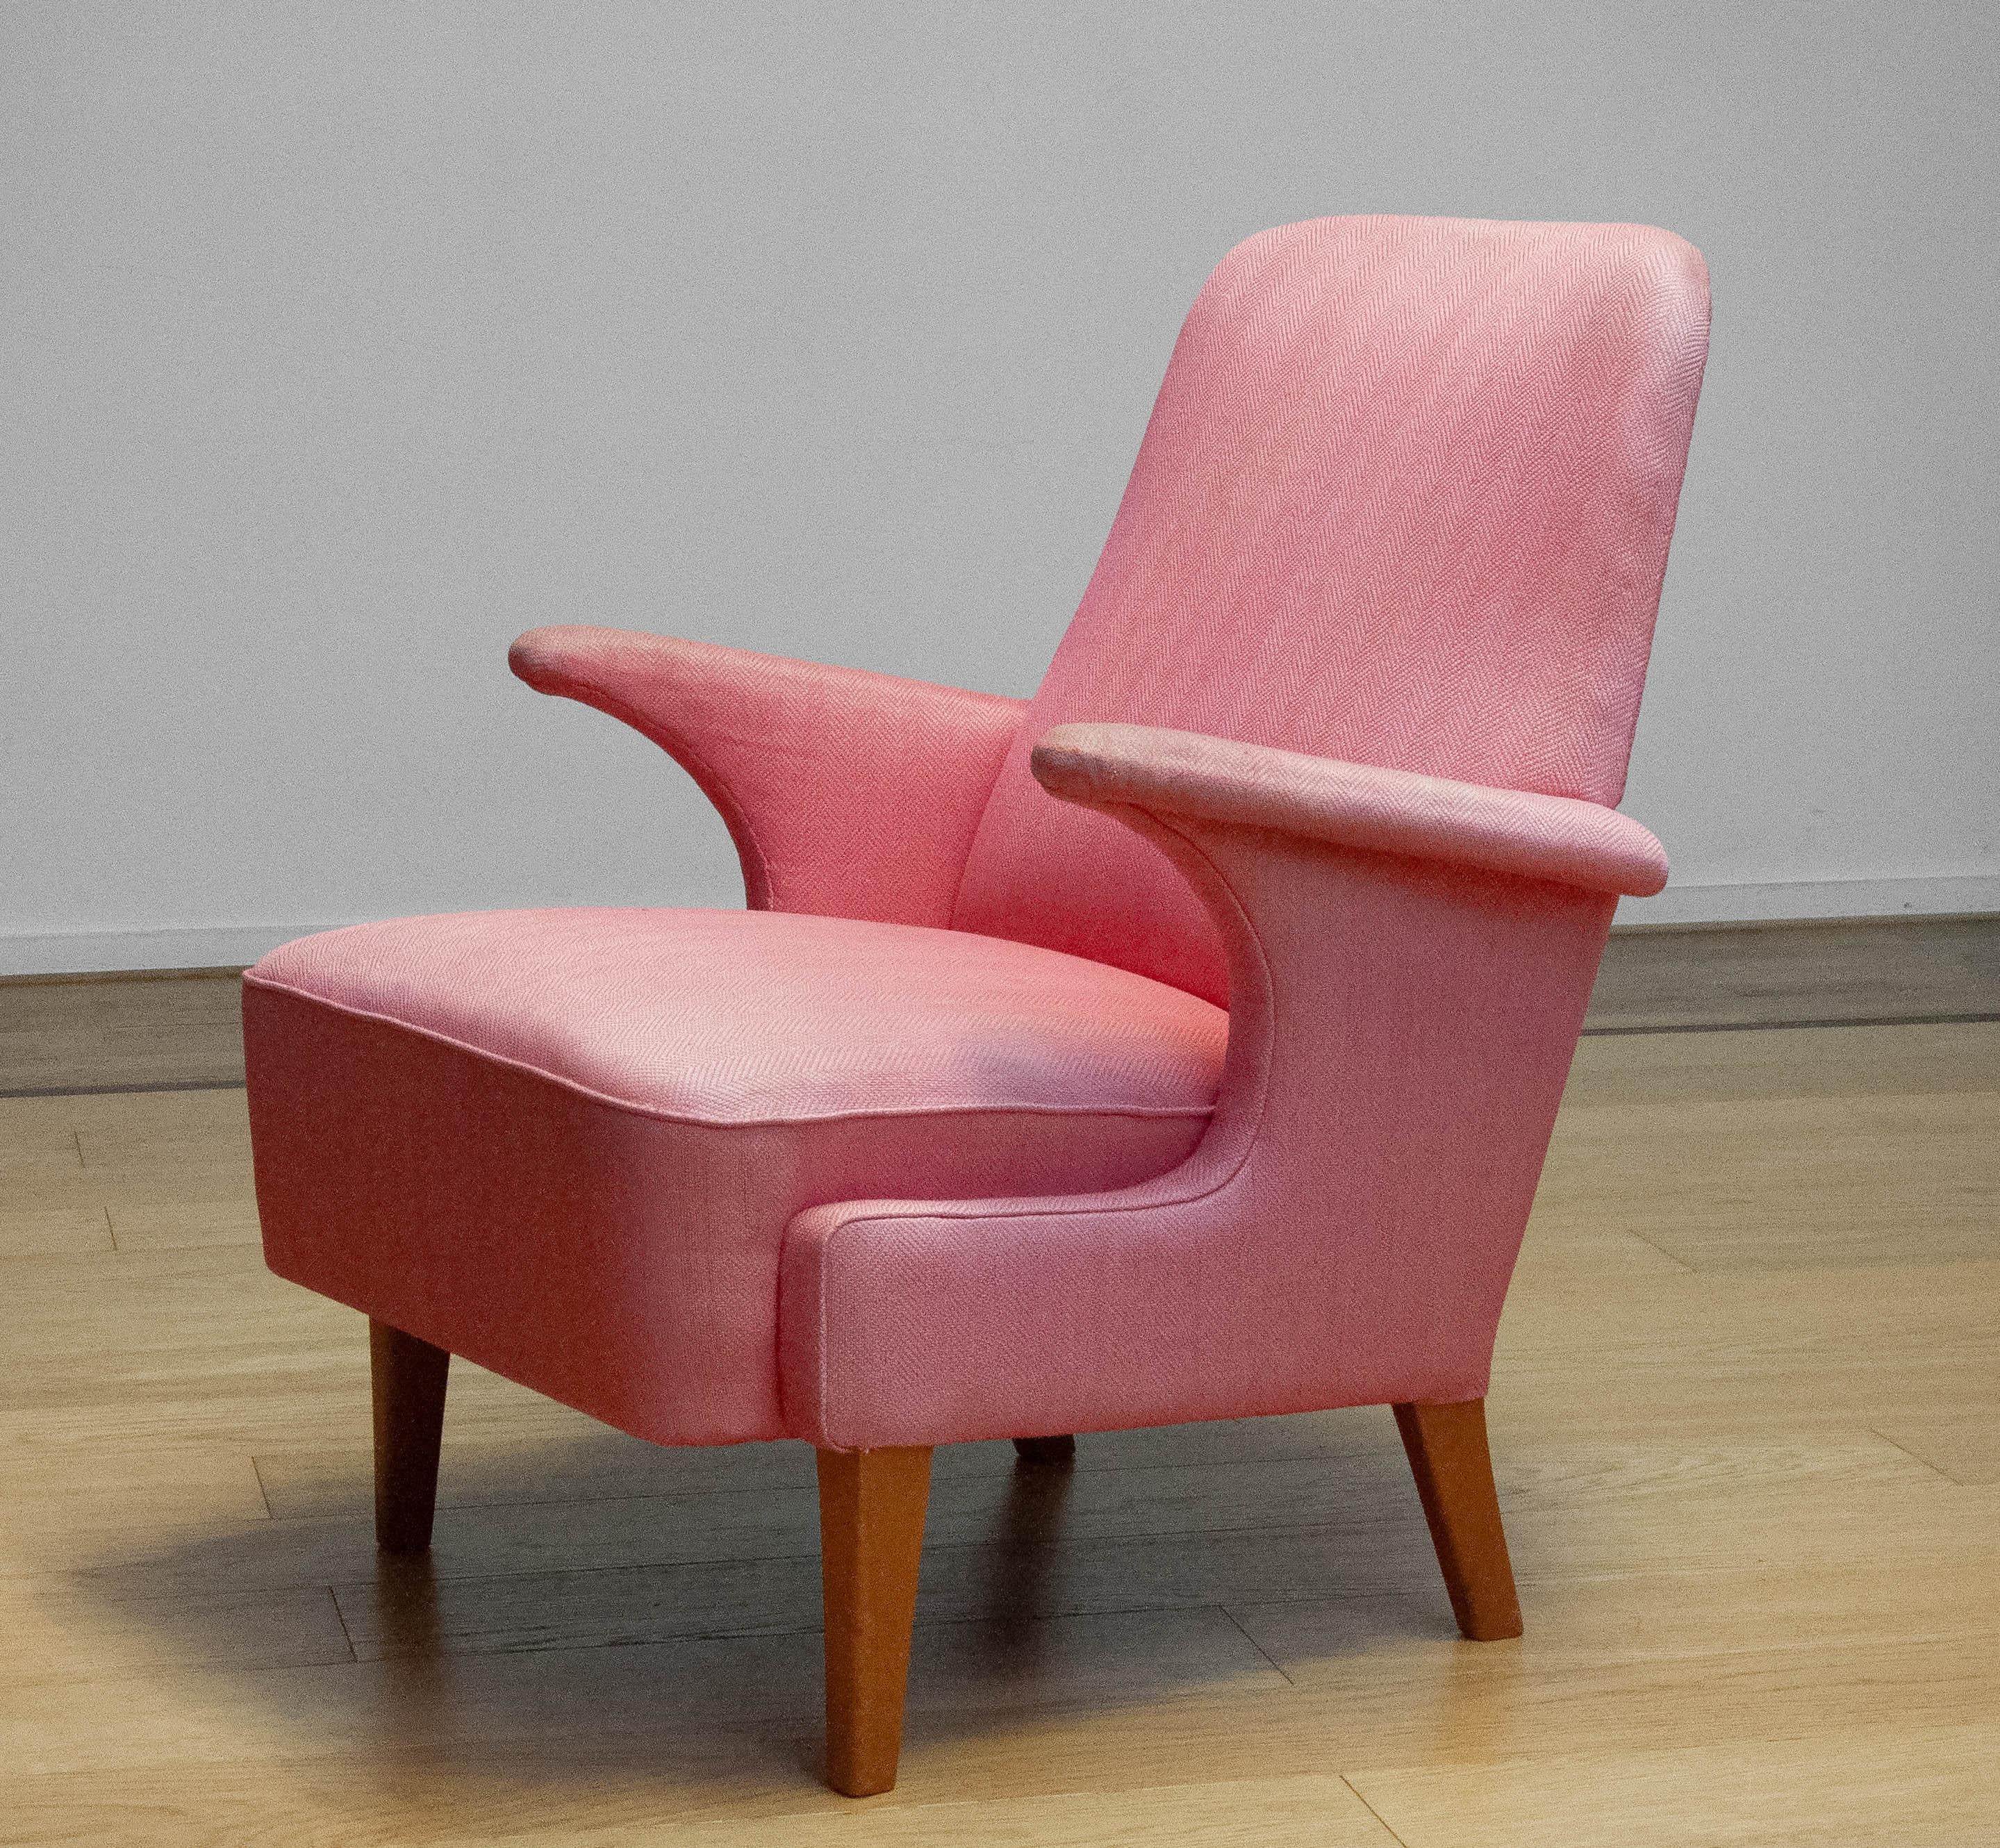 1950 Armchair / Lounge Chair With Powder Pink Wool Upholstery By Dux From Sweden For Sale 2